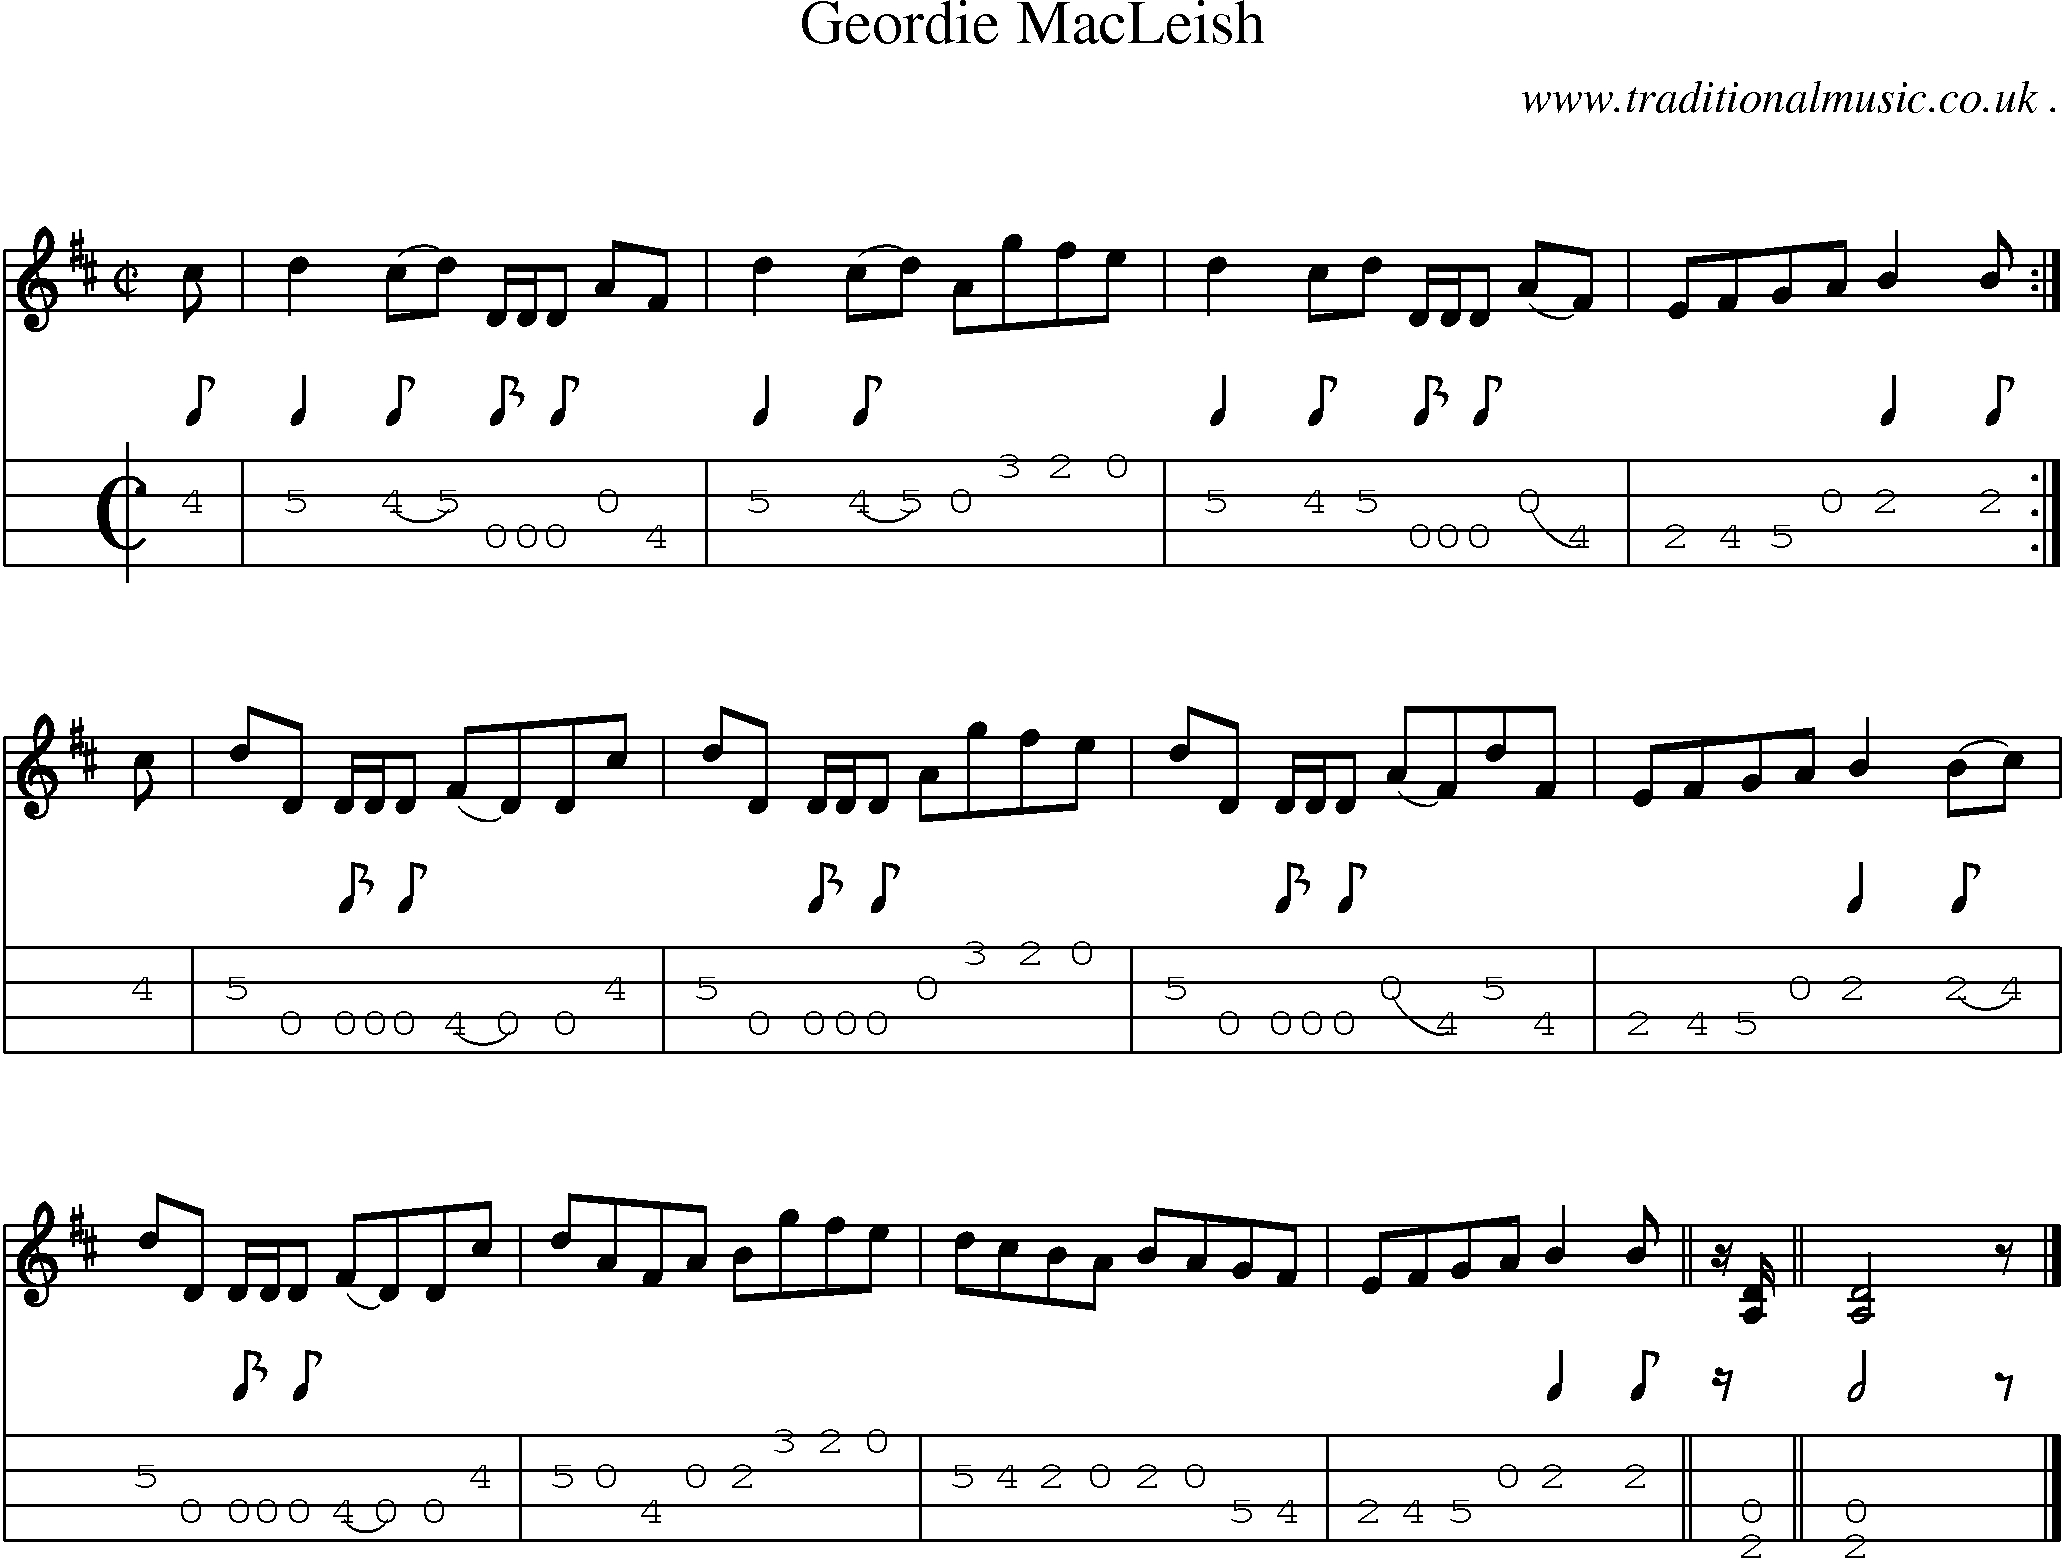 Sheet-music  score, Chords and Mandolin Tabs for Geordie Macleish